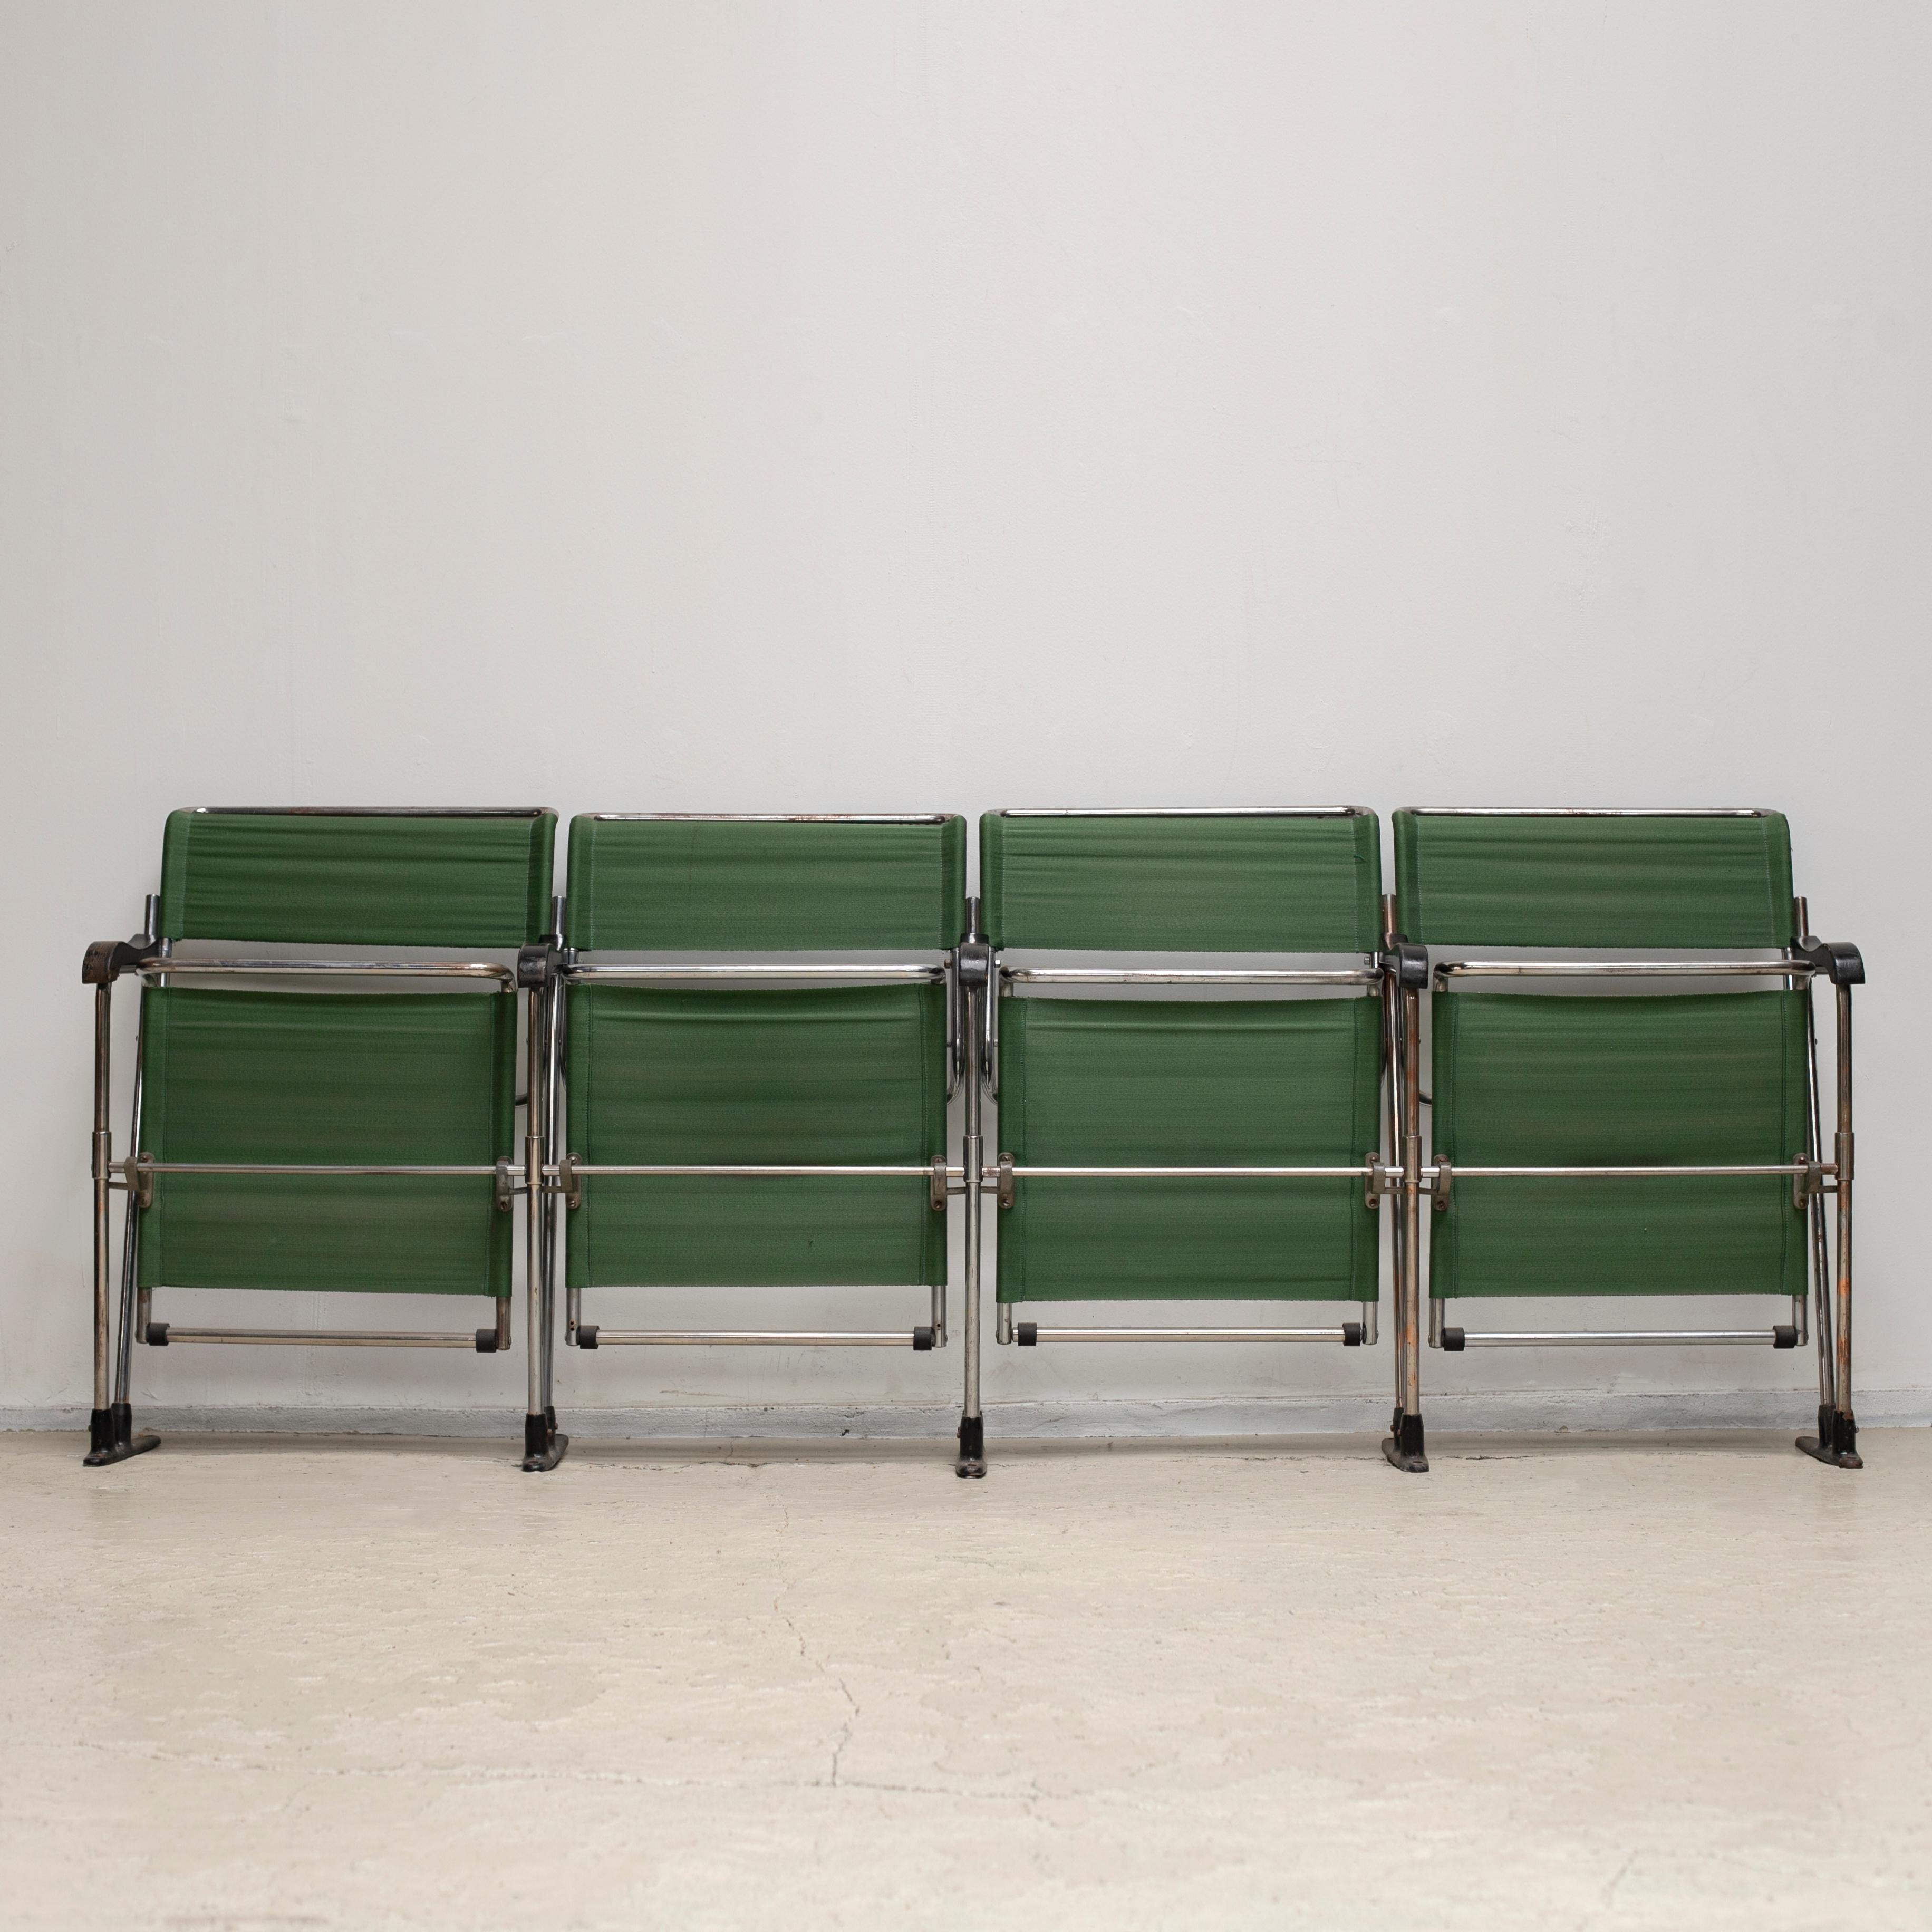 Rare theater bench designed by Marcel Breuer in 1920s.
Manufactured during 1928-1929 by Thonet.
Famous that it used to be used in The Andy Warhol Museum.